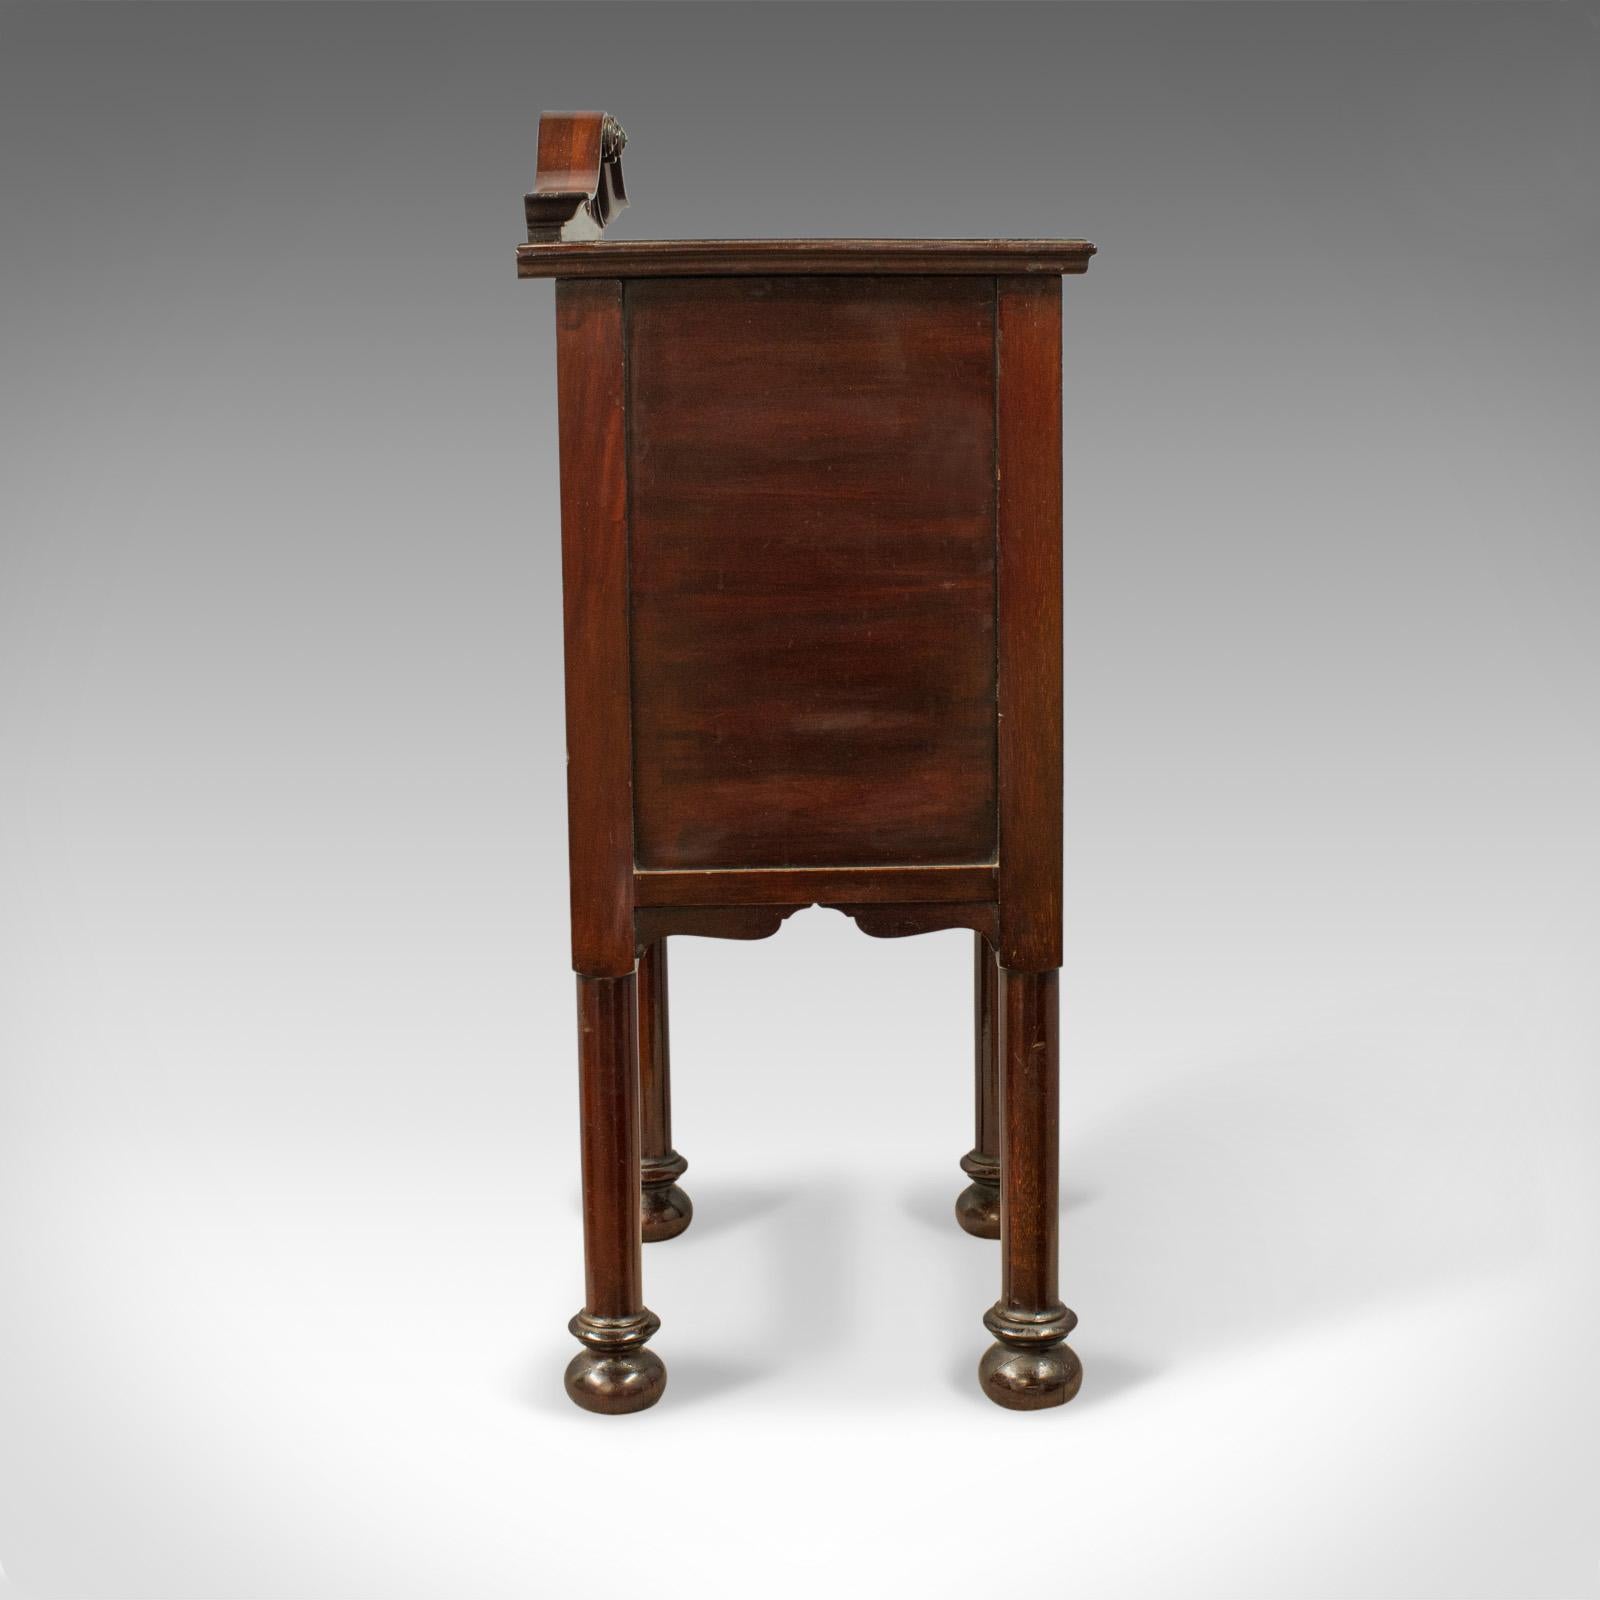 English Antique Bedside Cabinet, Arts and Crafts, Maple and Co., Nighstand, circa 1890